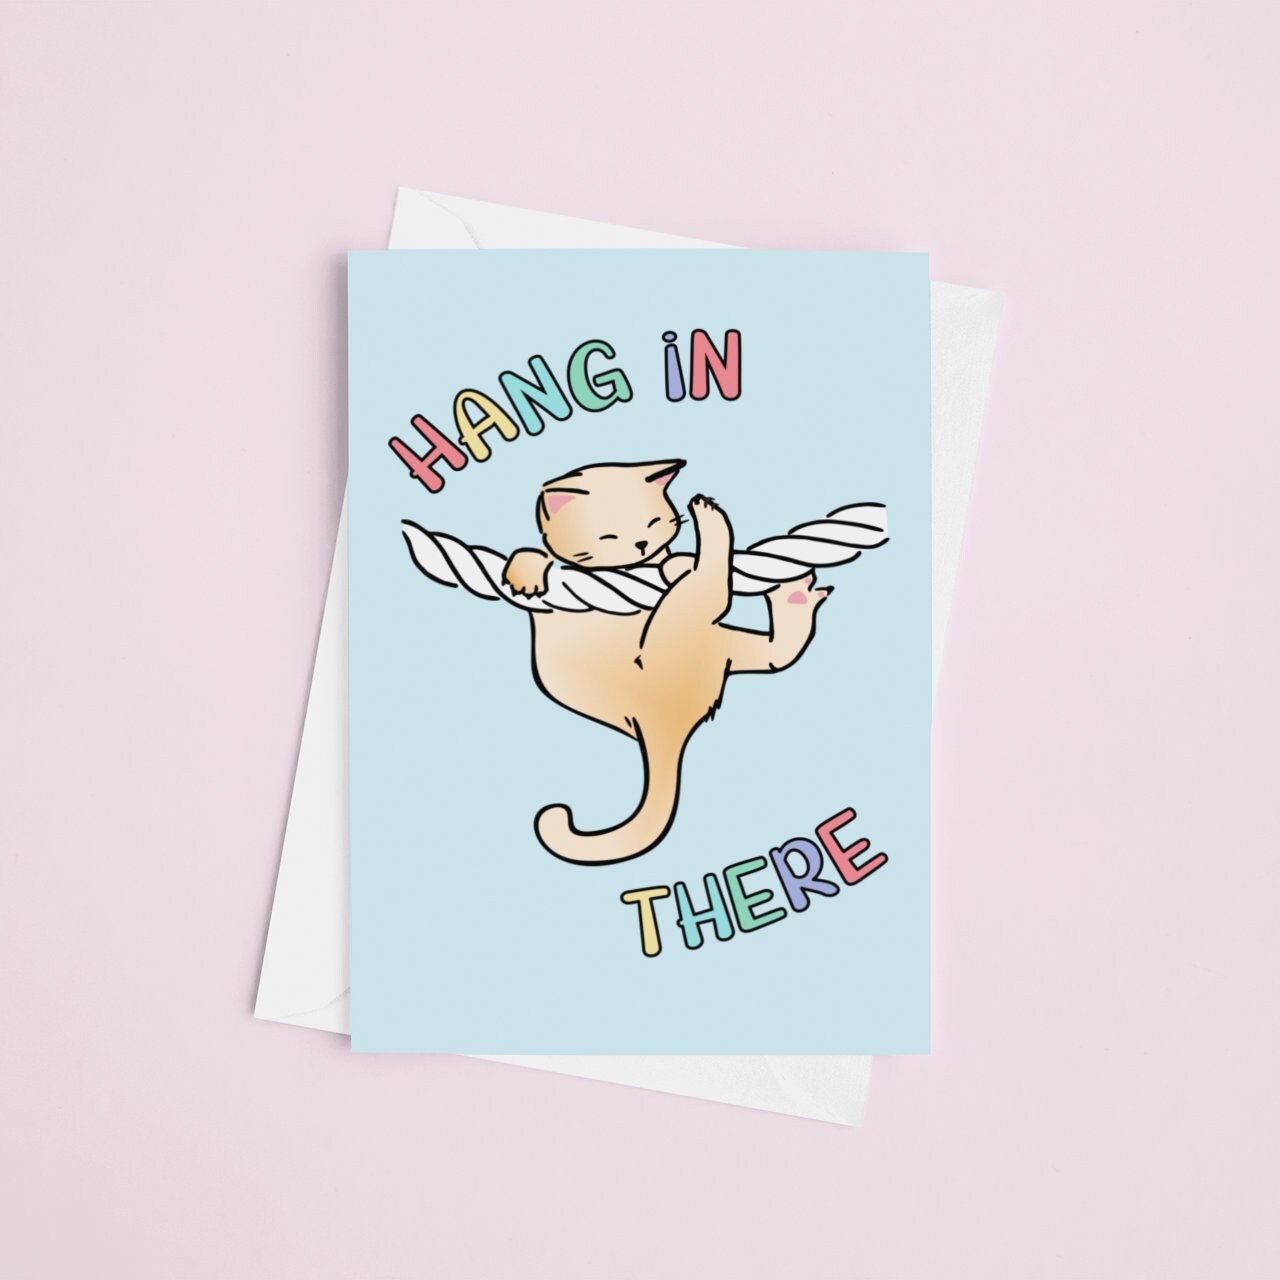 Hang In There Postcard | A6 Card - Cat Postcards - Cute Cats - Positive Gift - Inspiring Postcard